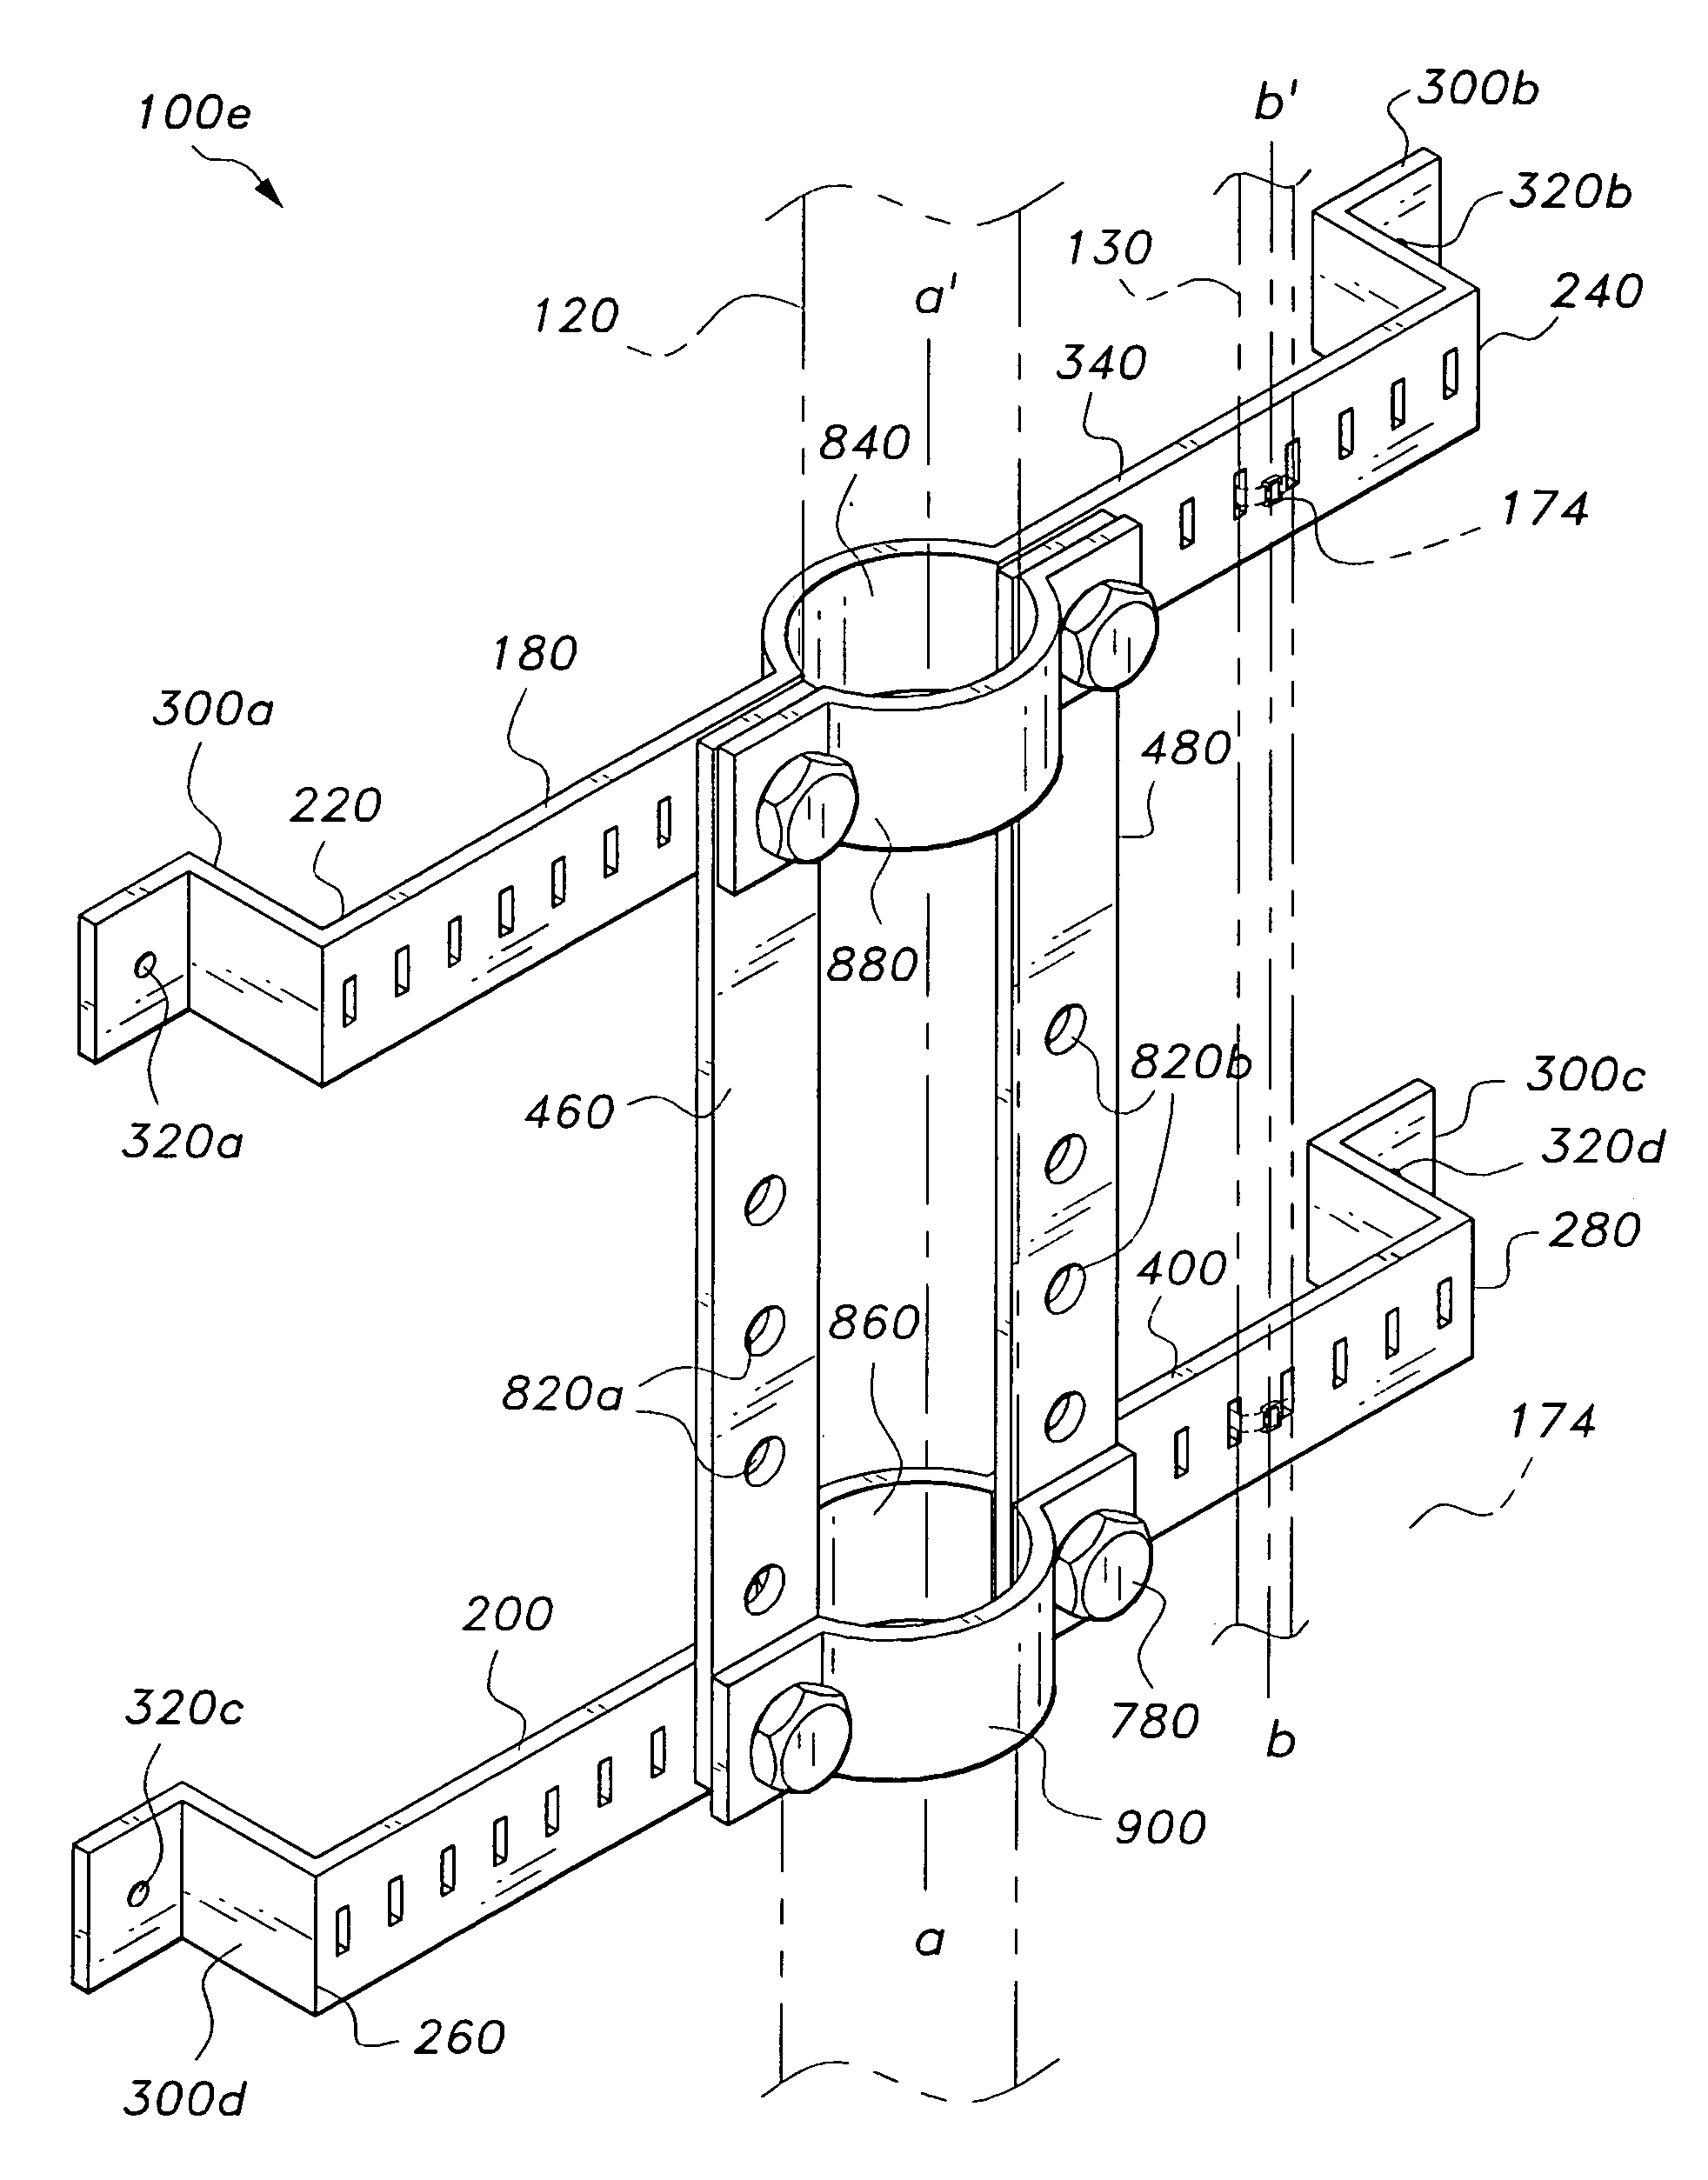 Alignment and support apparatus